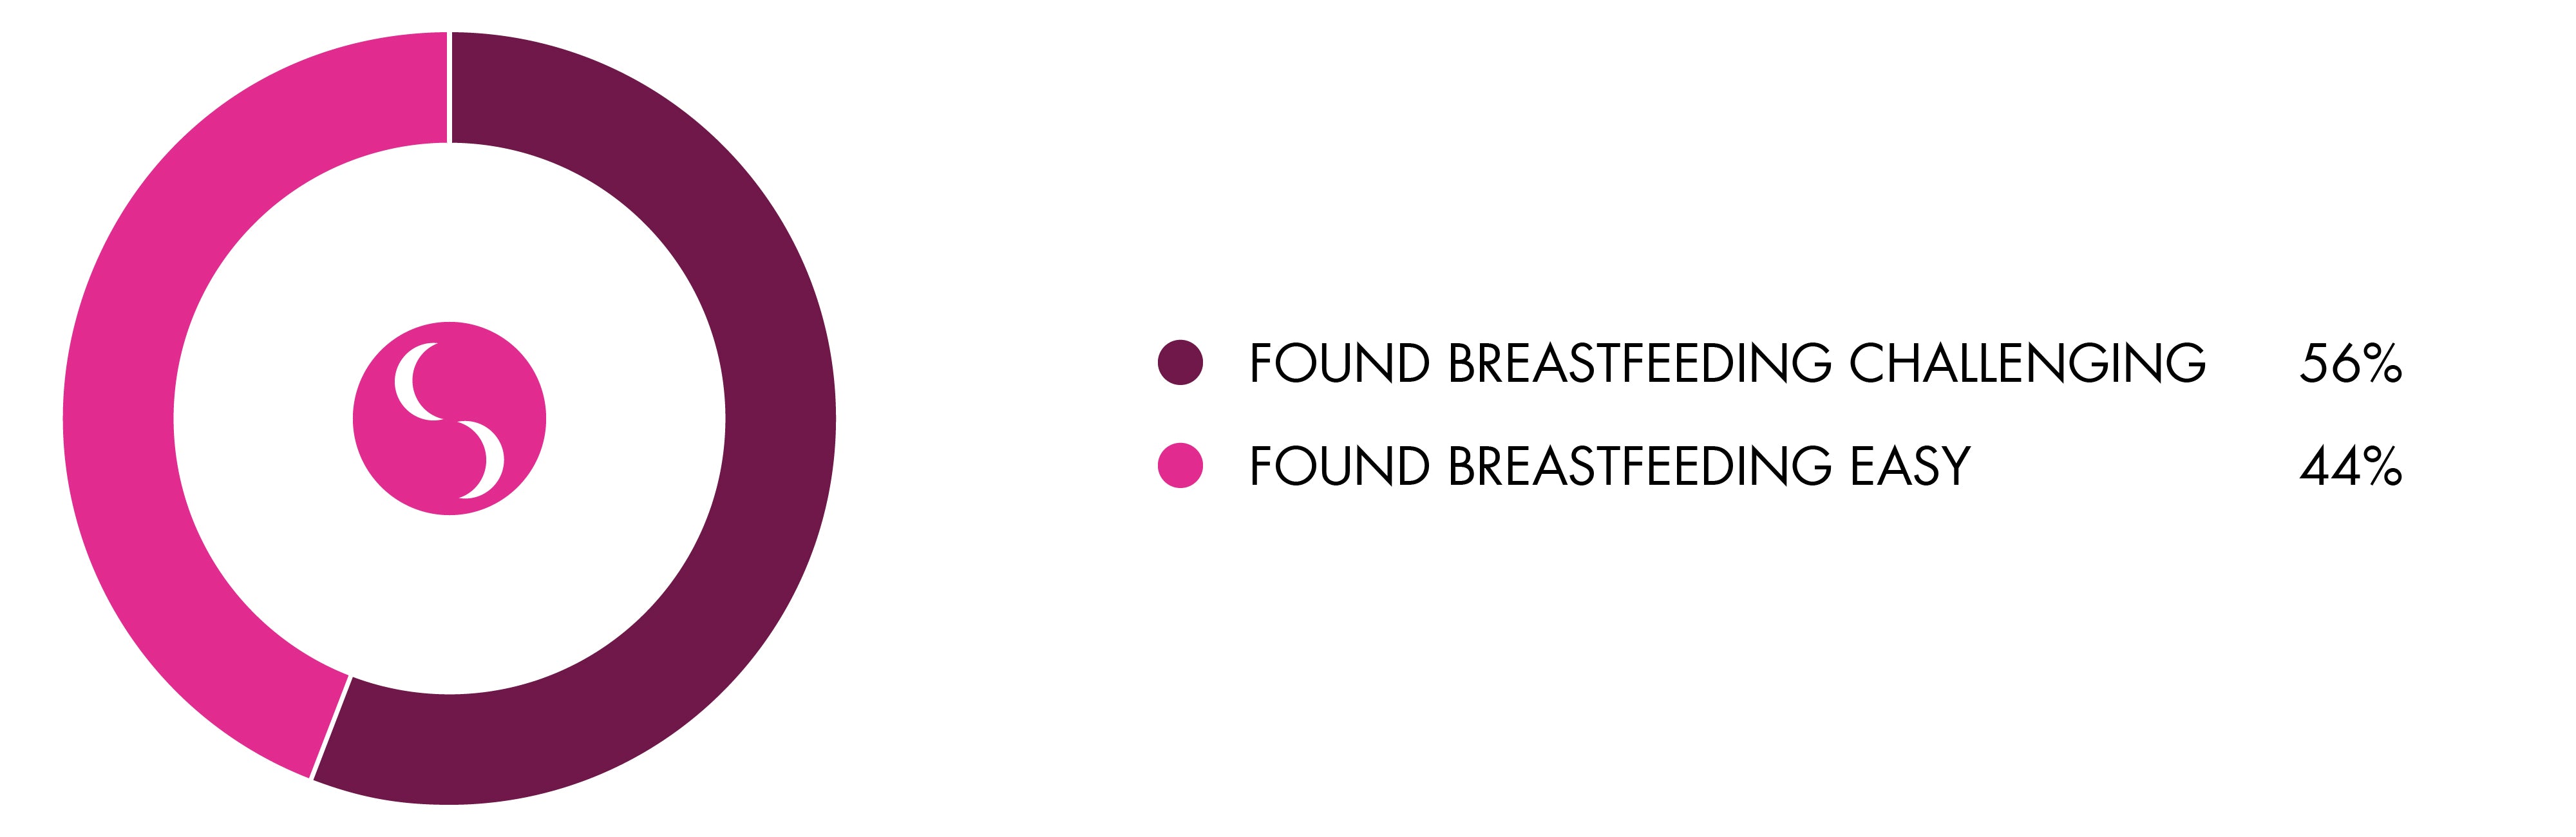 is-breastfeeding-difficult-graph